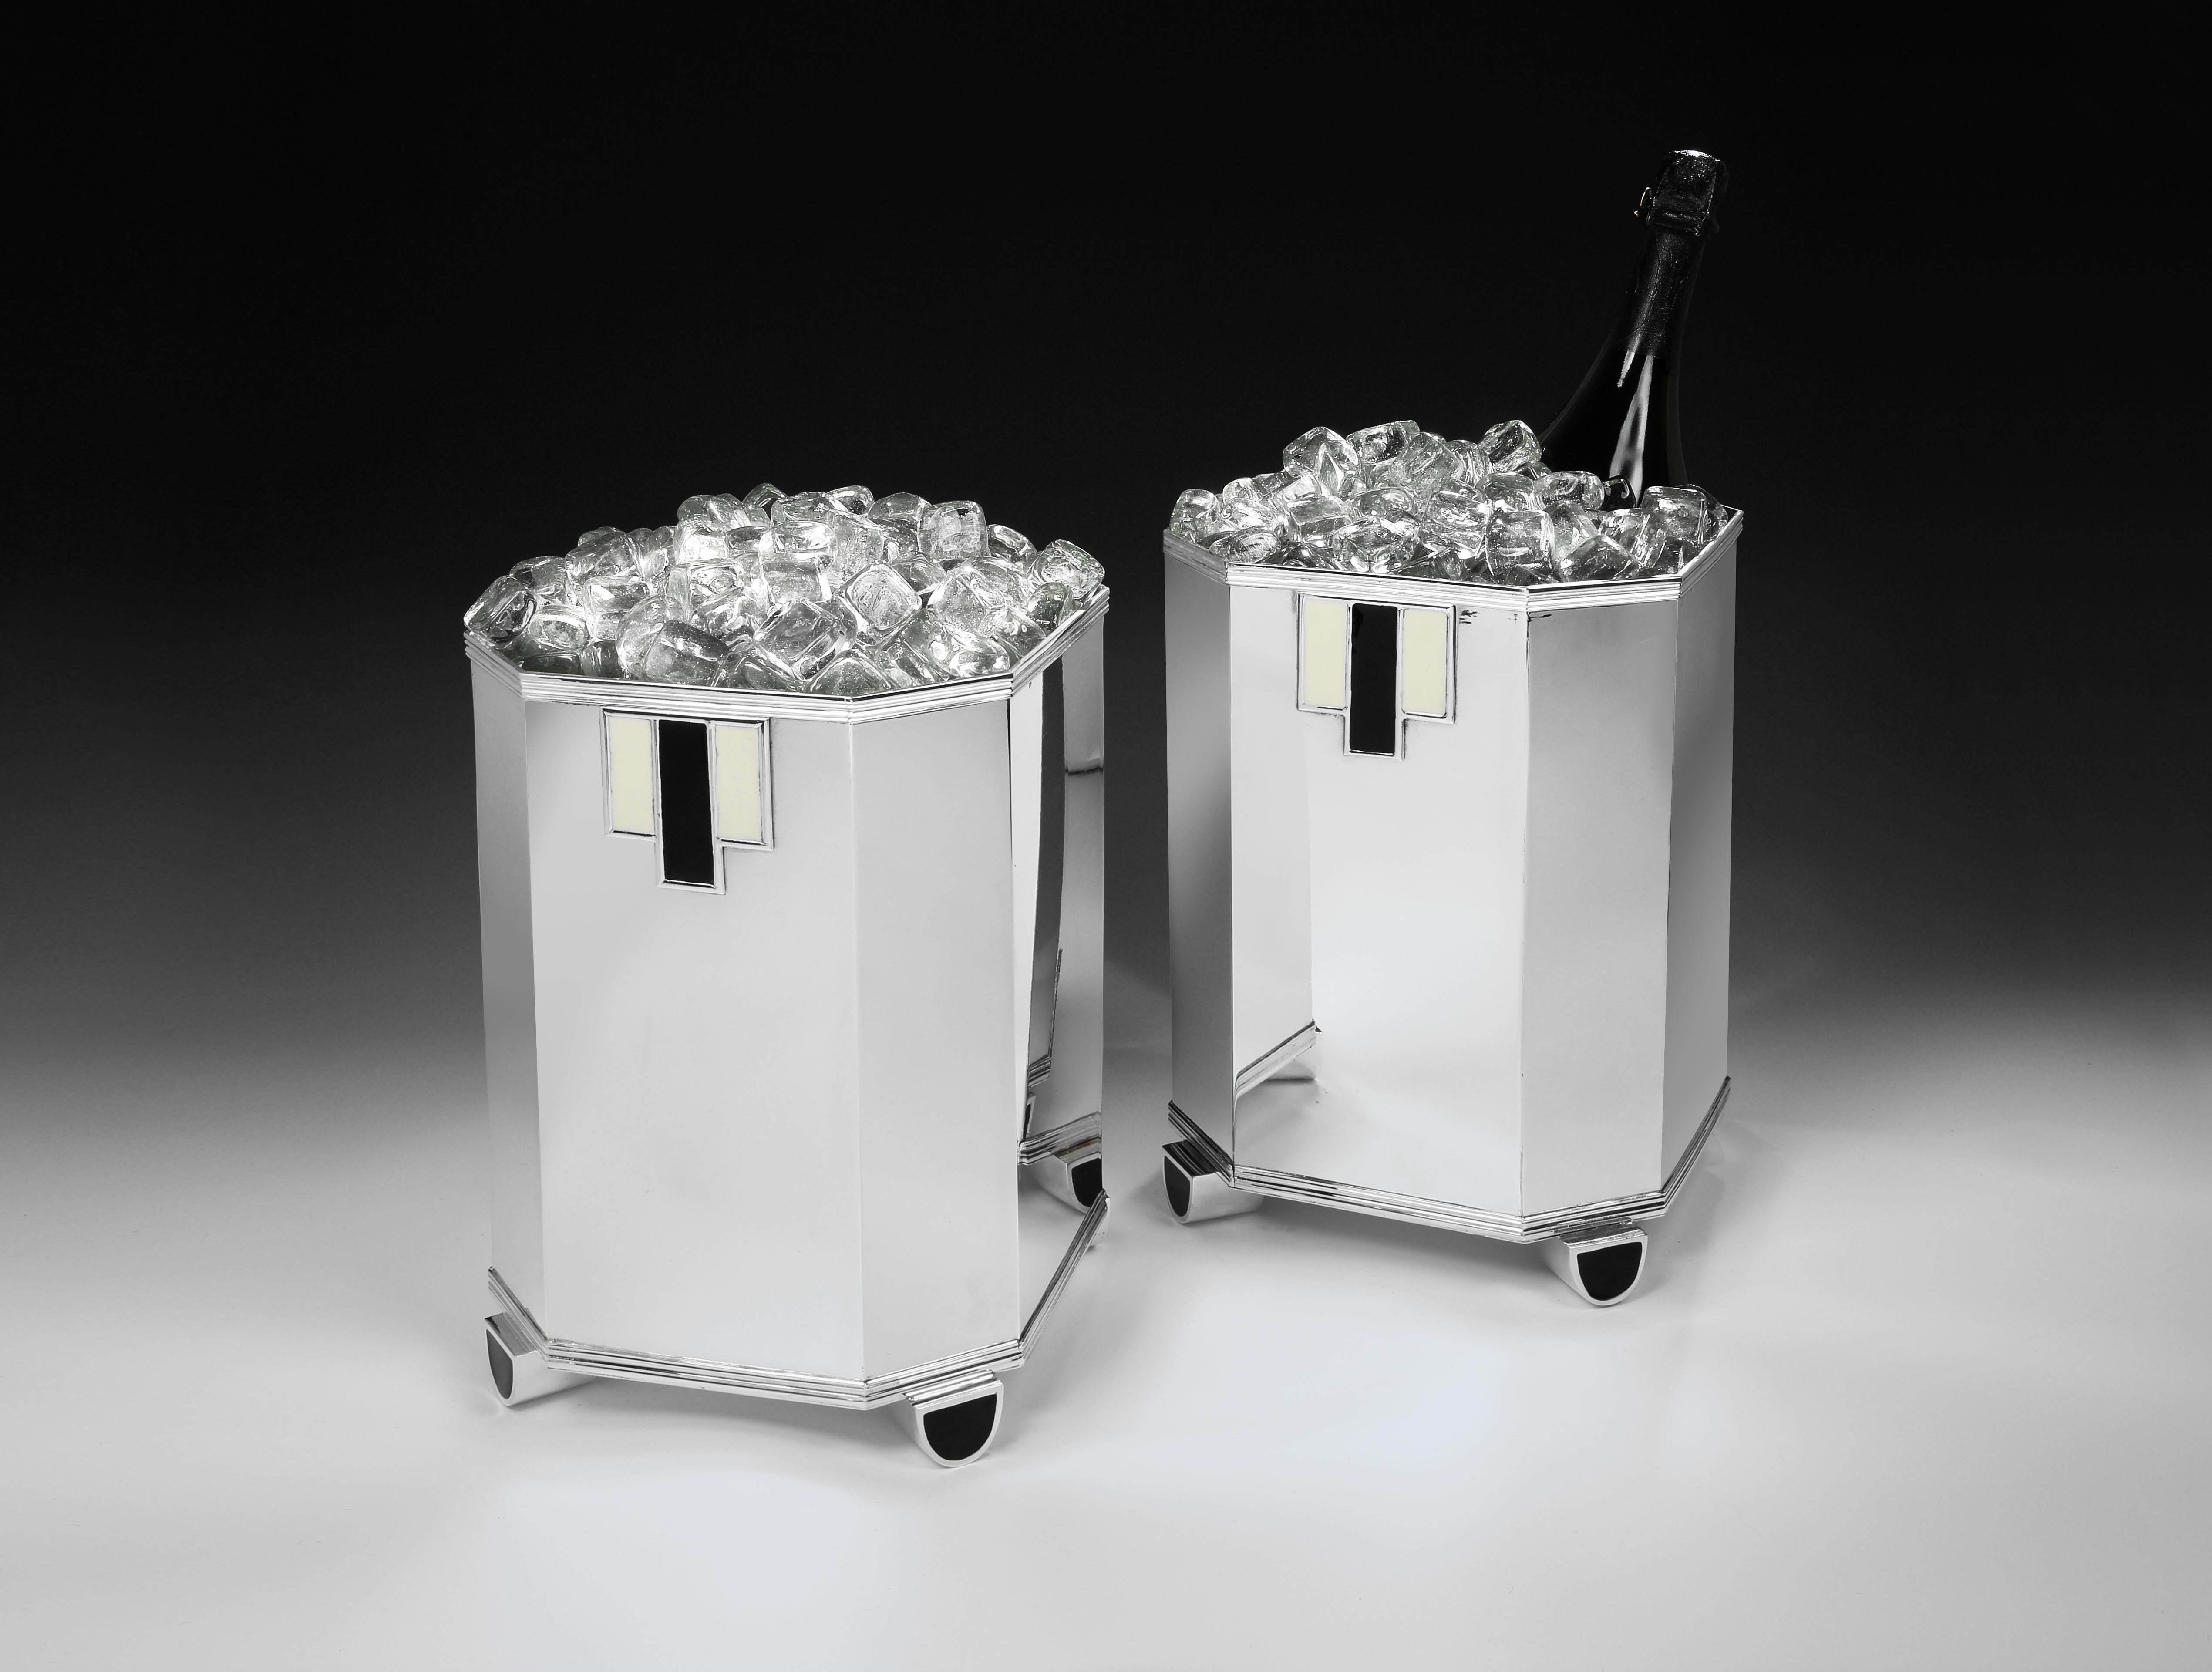 Cardeilhac, Paris 

A showstopping pair of Sterling silver Art Deco Champagne coolers by renowned Parisian silversmiths Cardeilhac. Each geometric cooler has eight sides and a deep semi-circular foot set proud of each corner, finished in glossy